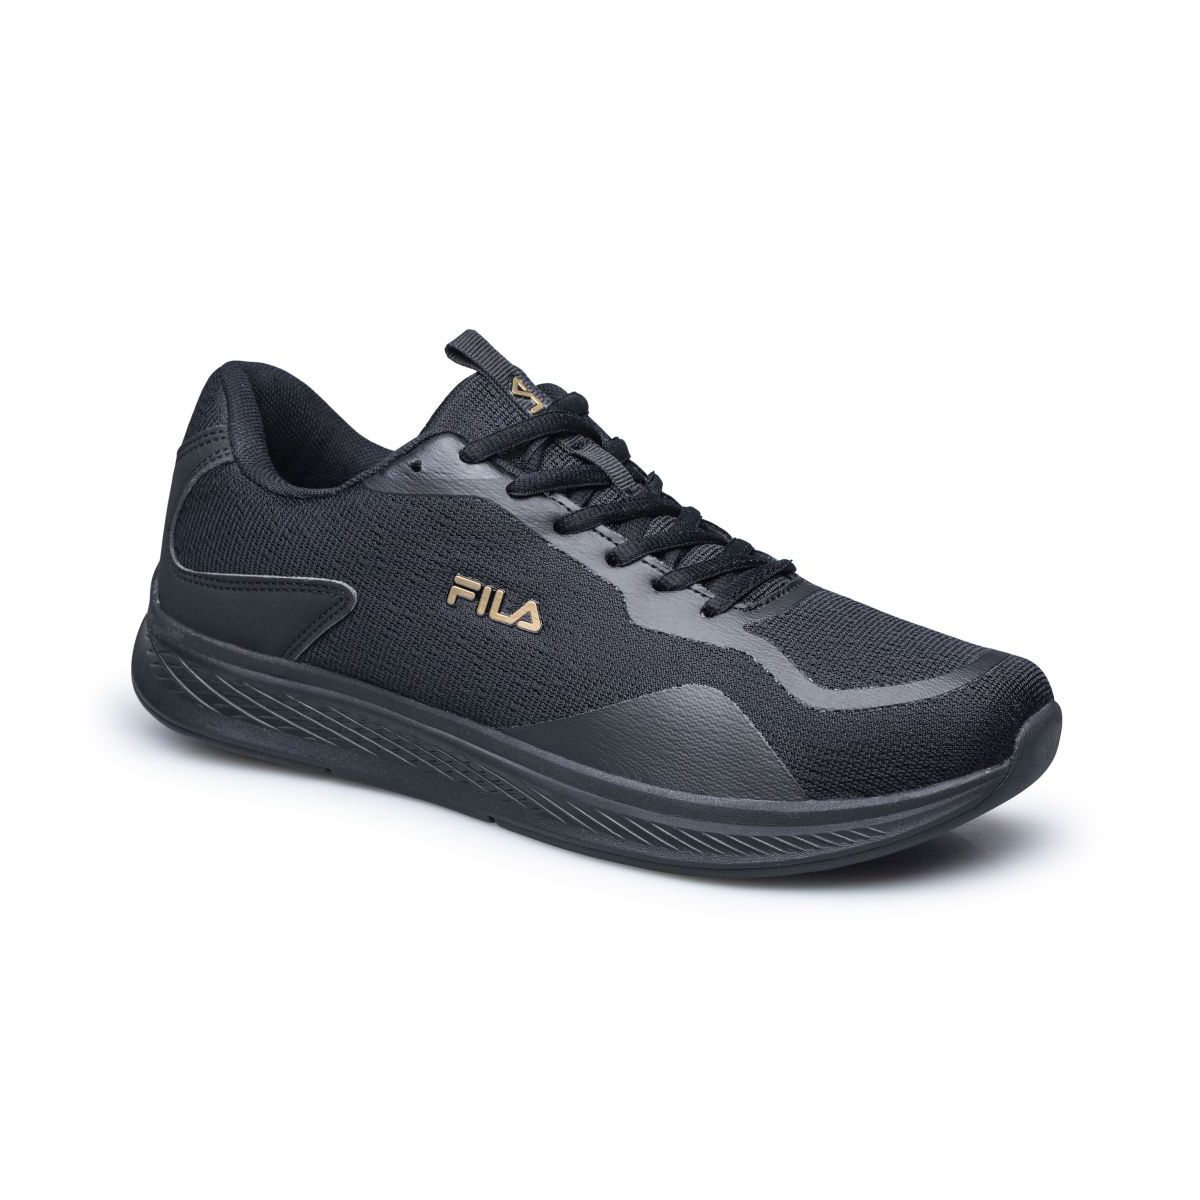 Fila Memory Conch 2 Women's Running Shoes 5AF13029-033